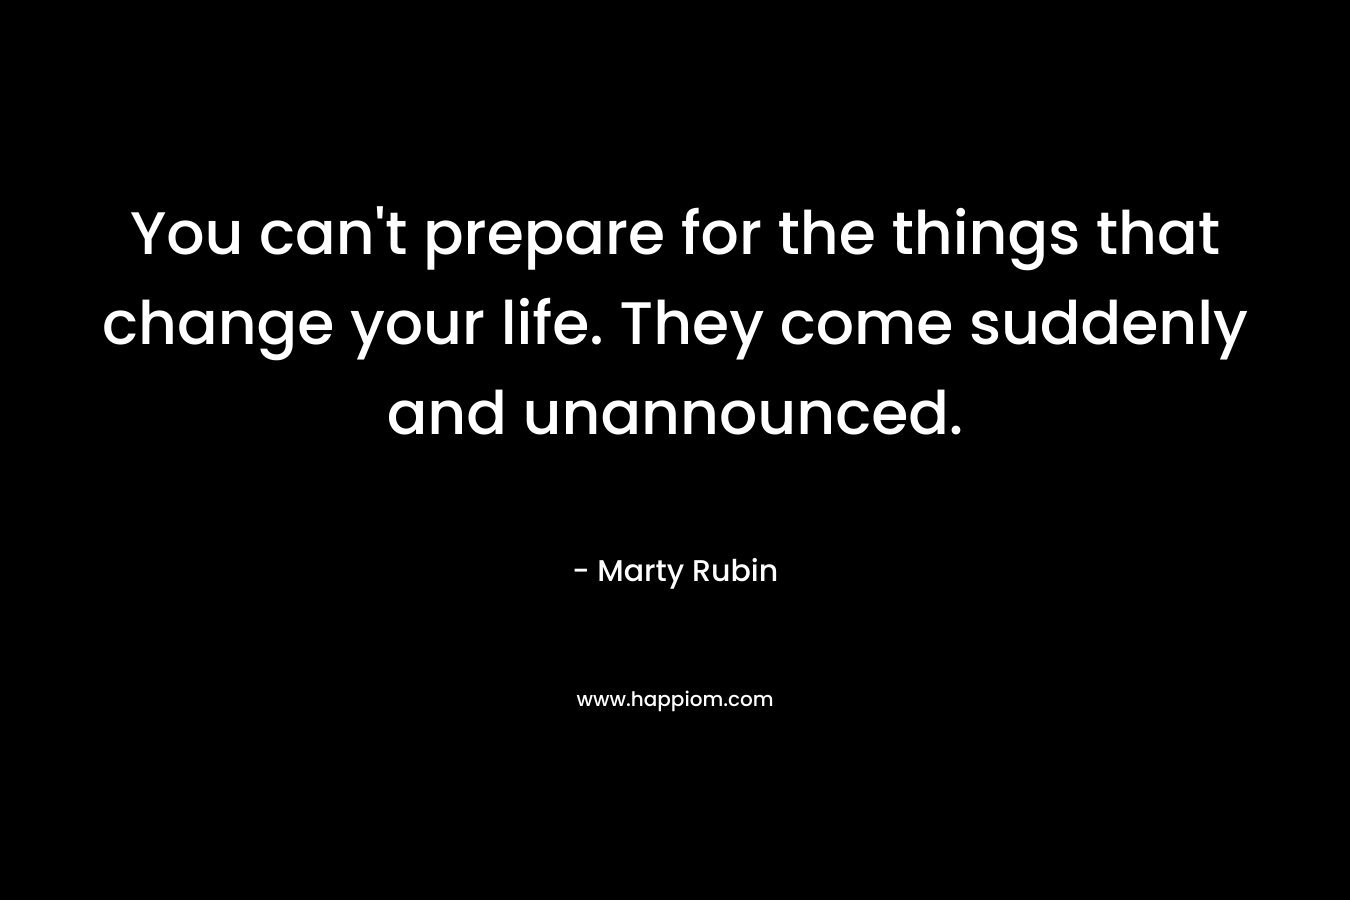 You can't prepare for the things that change your life. They come suddenly and unannounced.